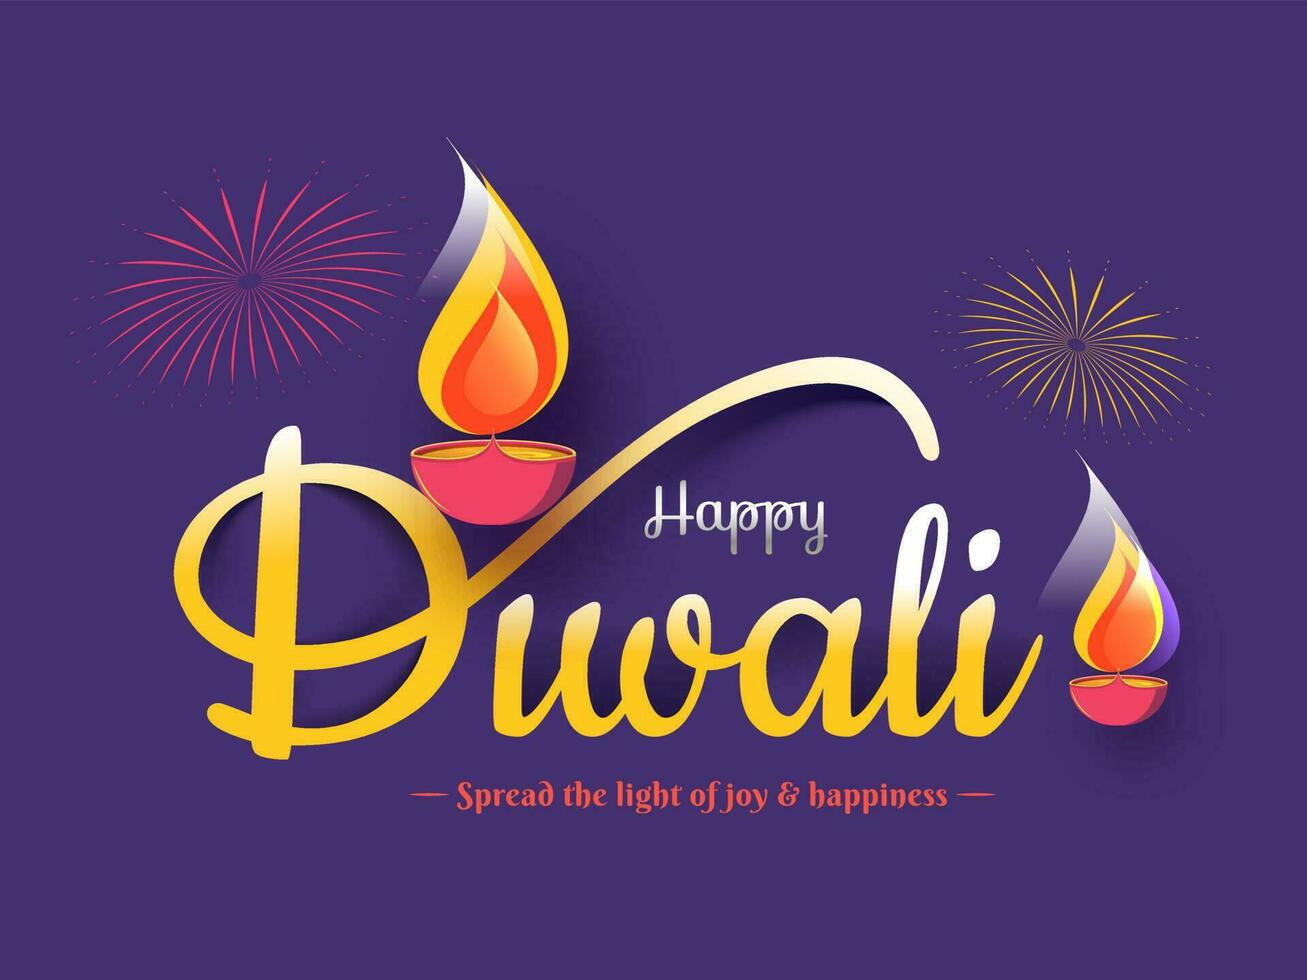 Calligraphy of Happy Diwali with illuminated oil lamps and given message for you as Spread the Light of Joy Happiness on purple background. vector